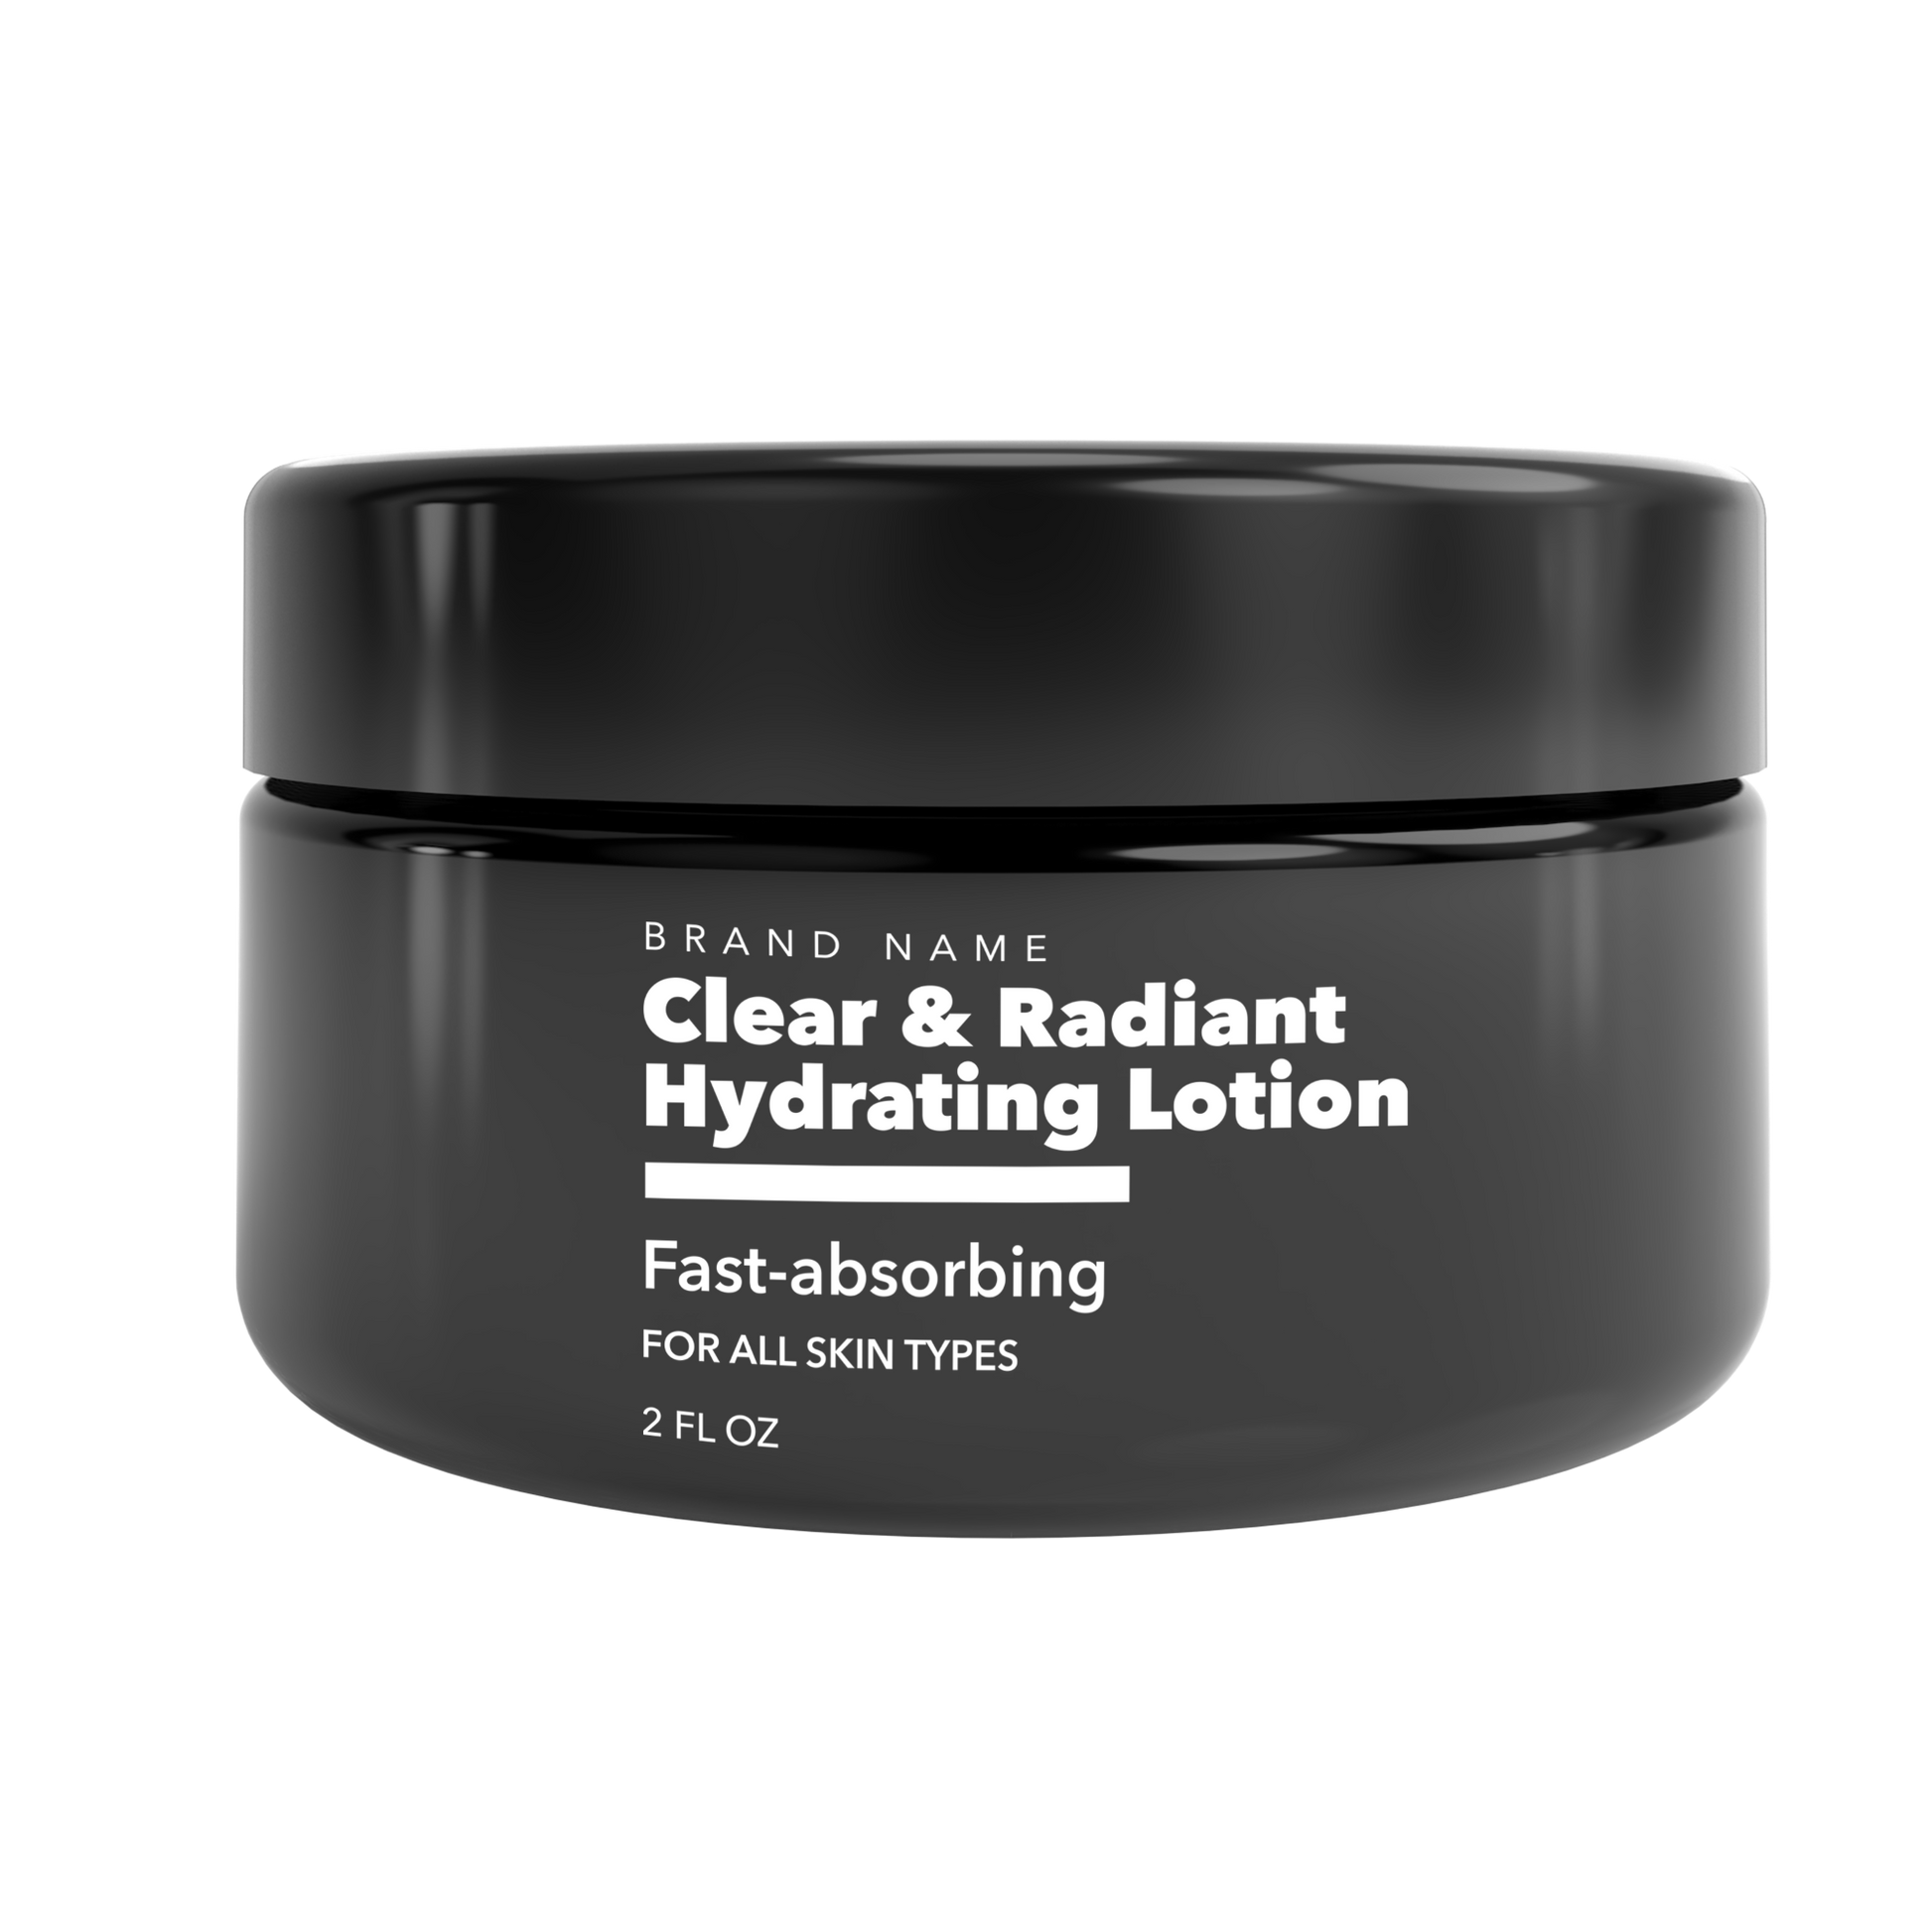 Clear & Radiant Hydrating Lotion Private Label Skincare Manufacture your own skincare product